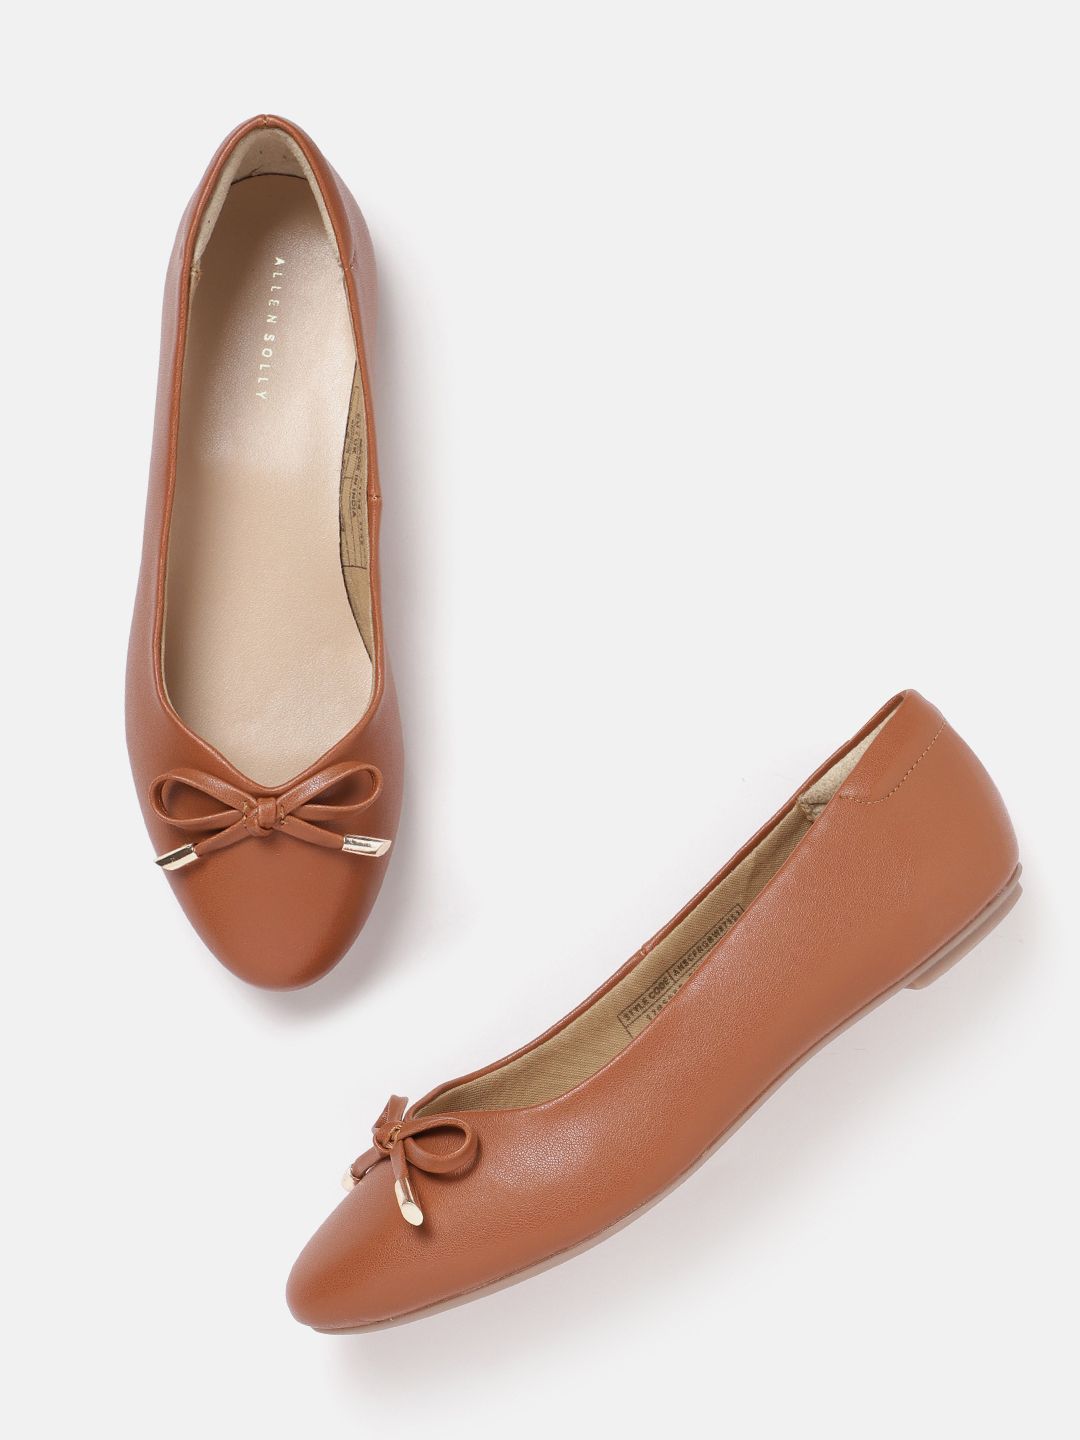 Allen Solly Women Ballerinas with Bows Detail Price in India